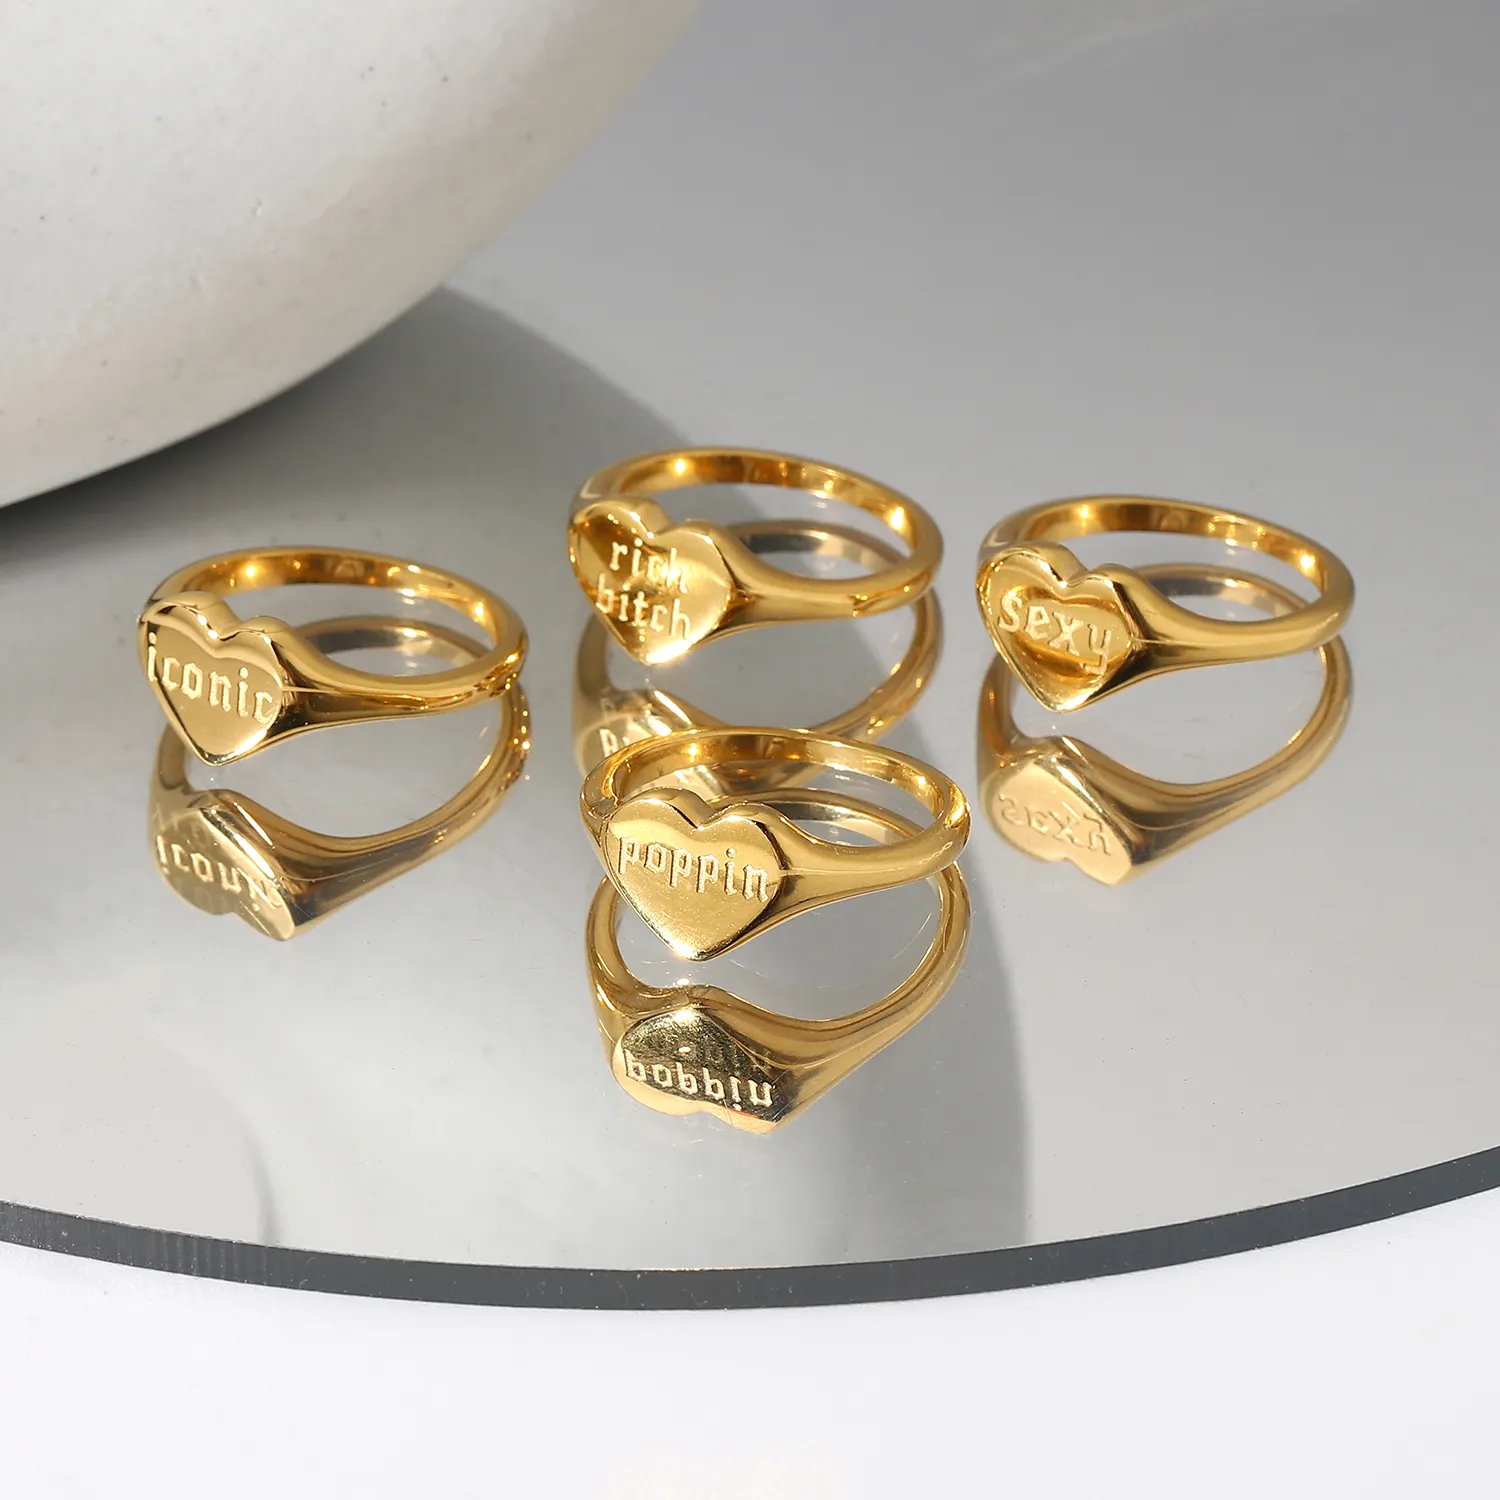 Engraved initial Word Rings Stainless Steel Jewelry rich bitch iconic poppin 18K Gold PVD Titanium Steel Heart Lettered Ring